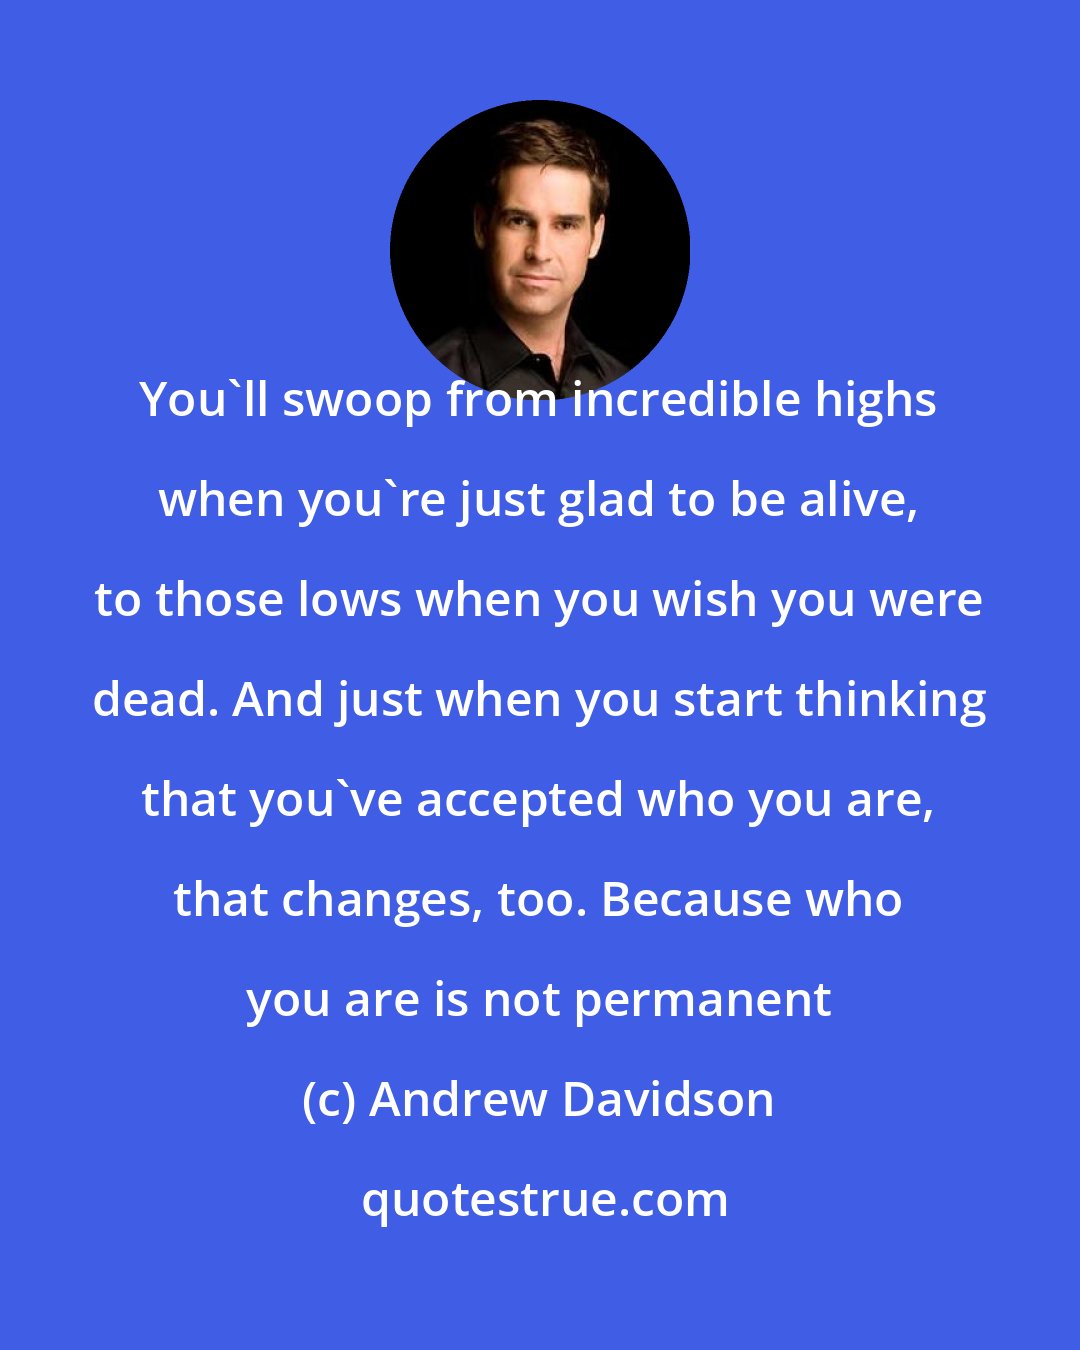 Andrew Davidson: You'll swoop from incredible highs when you're just glad to be alive, to those lows when you wish you were dead. And just when you start thinking that you've accepted who you are, that changes, too. Because who you are is not permanent